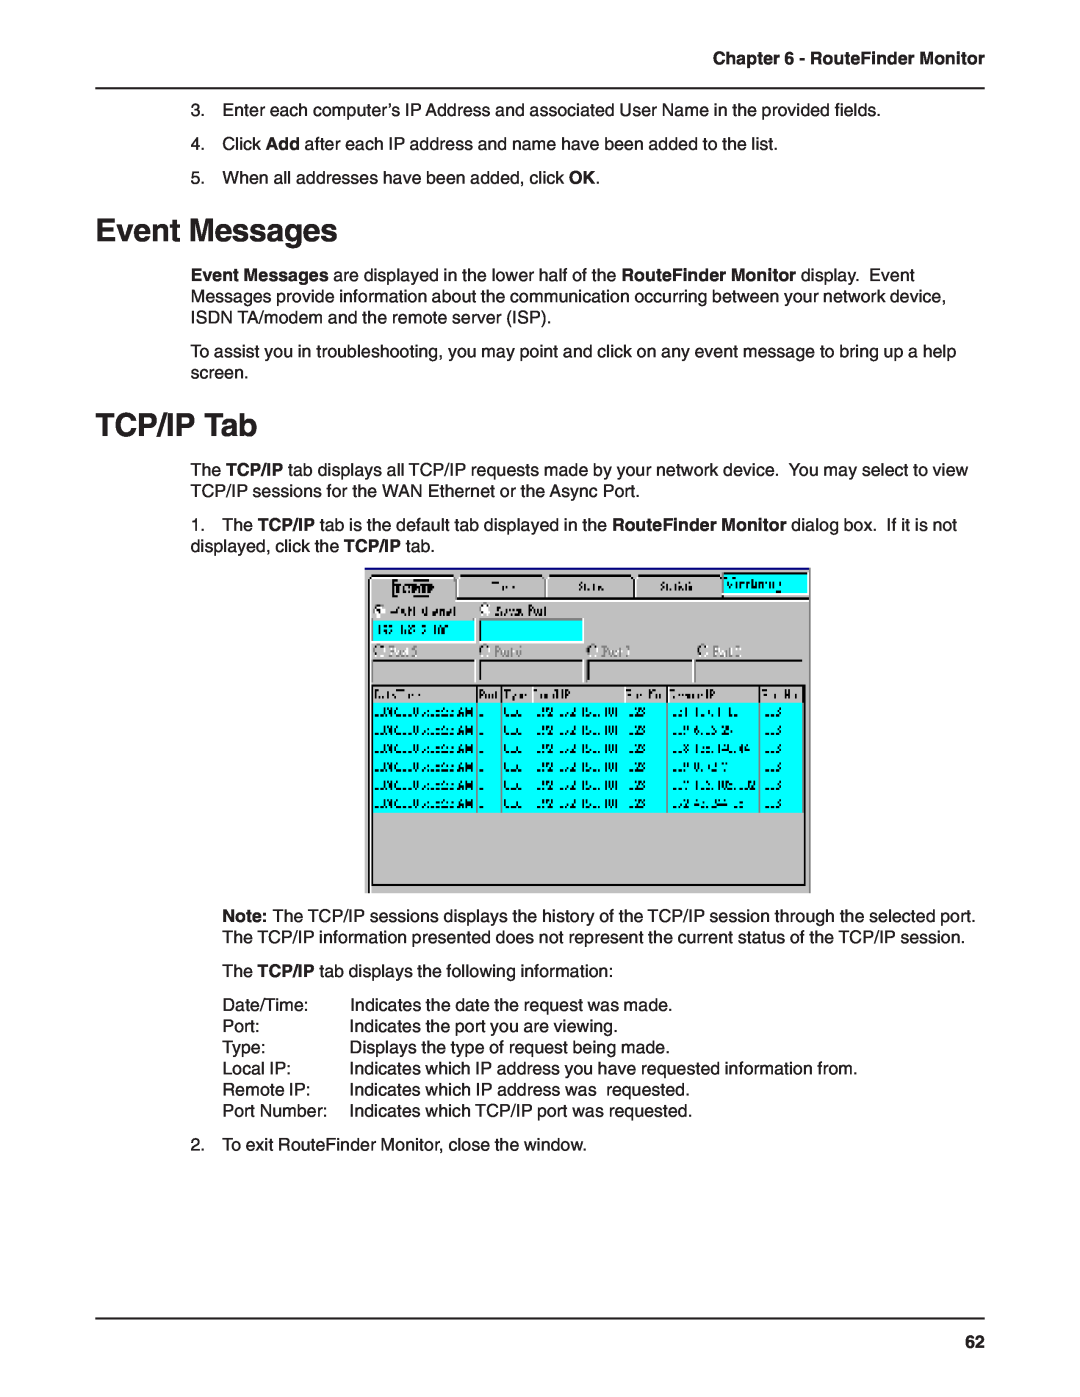 Multi-Tech Systems RF802EW manual Event Messages, TCP/IP Tab, RouteFinder Monitor 